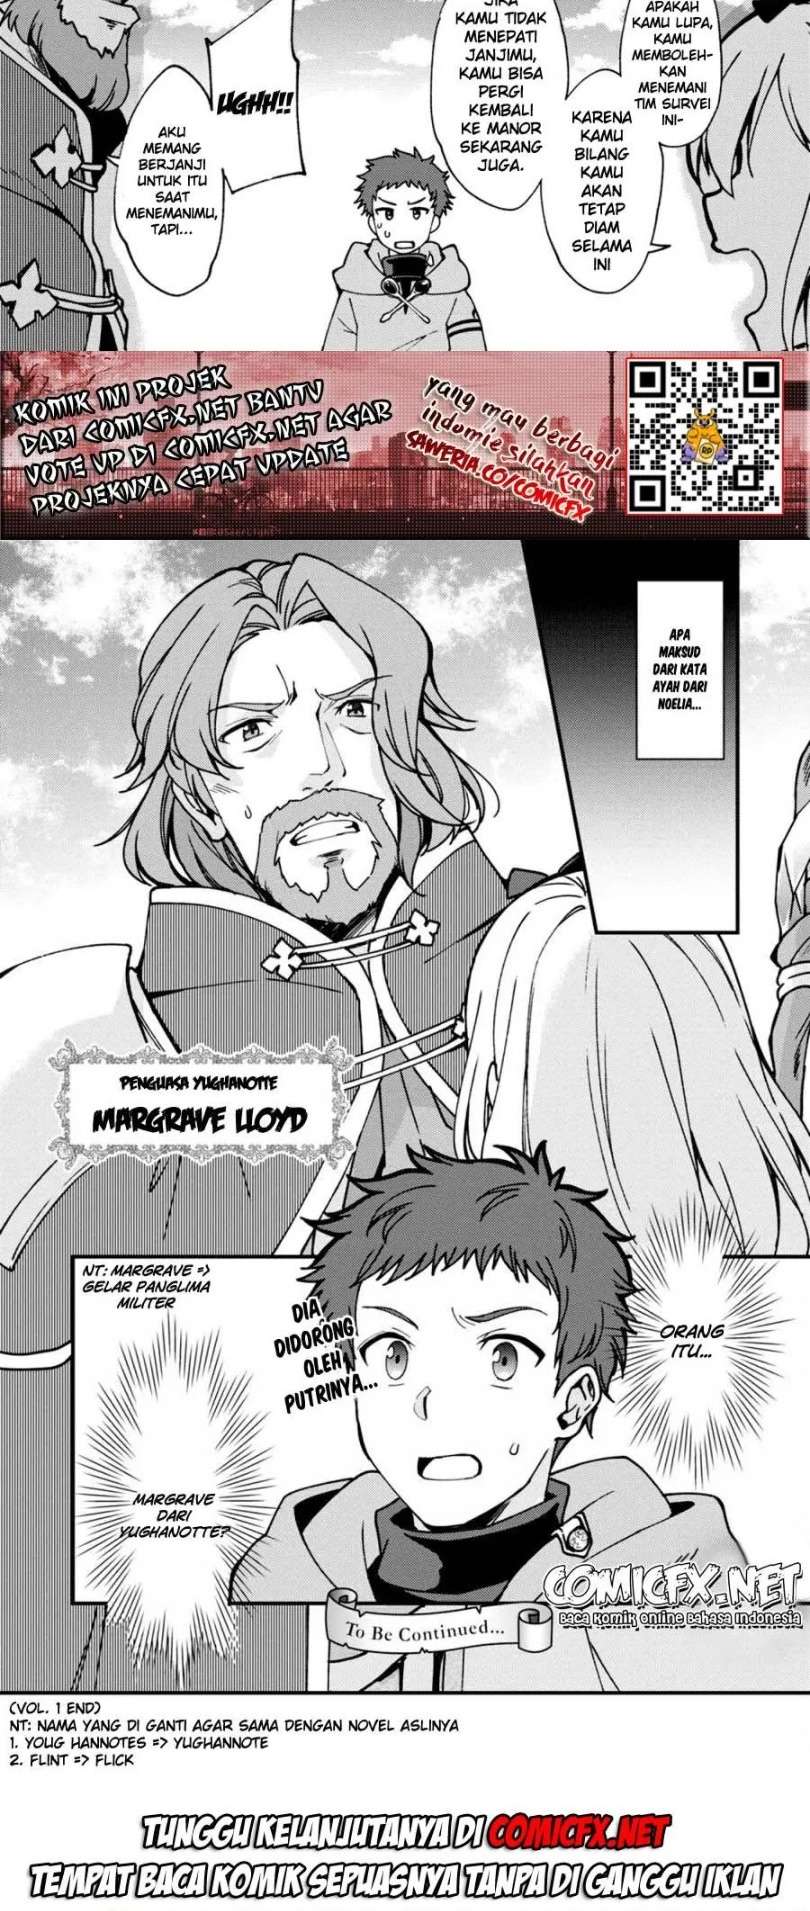 A Sword Master Childhood Friend Power Harassed Me Harshly, So I Broke off Our Relationship and Make a Fresh Start at the Frontier as a Magic Swordsman Chapter 5.2